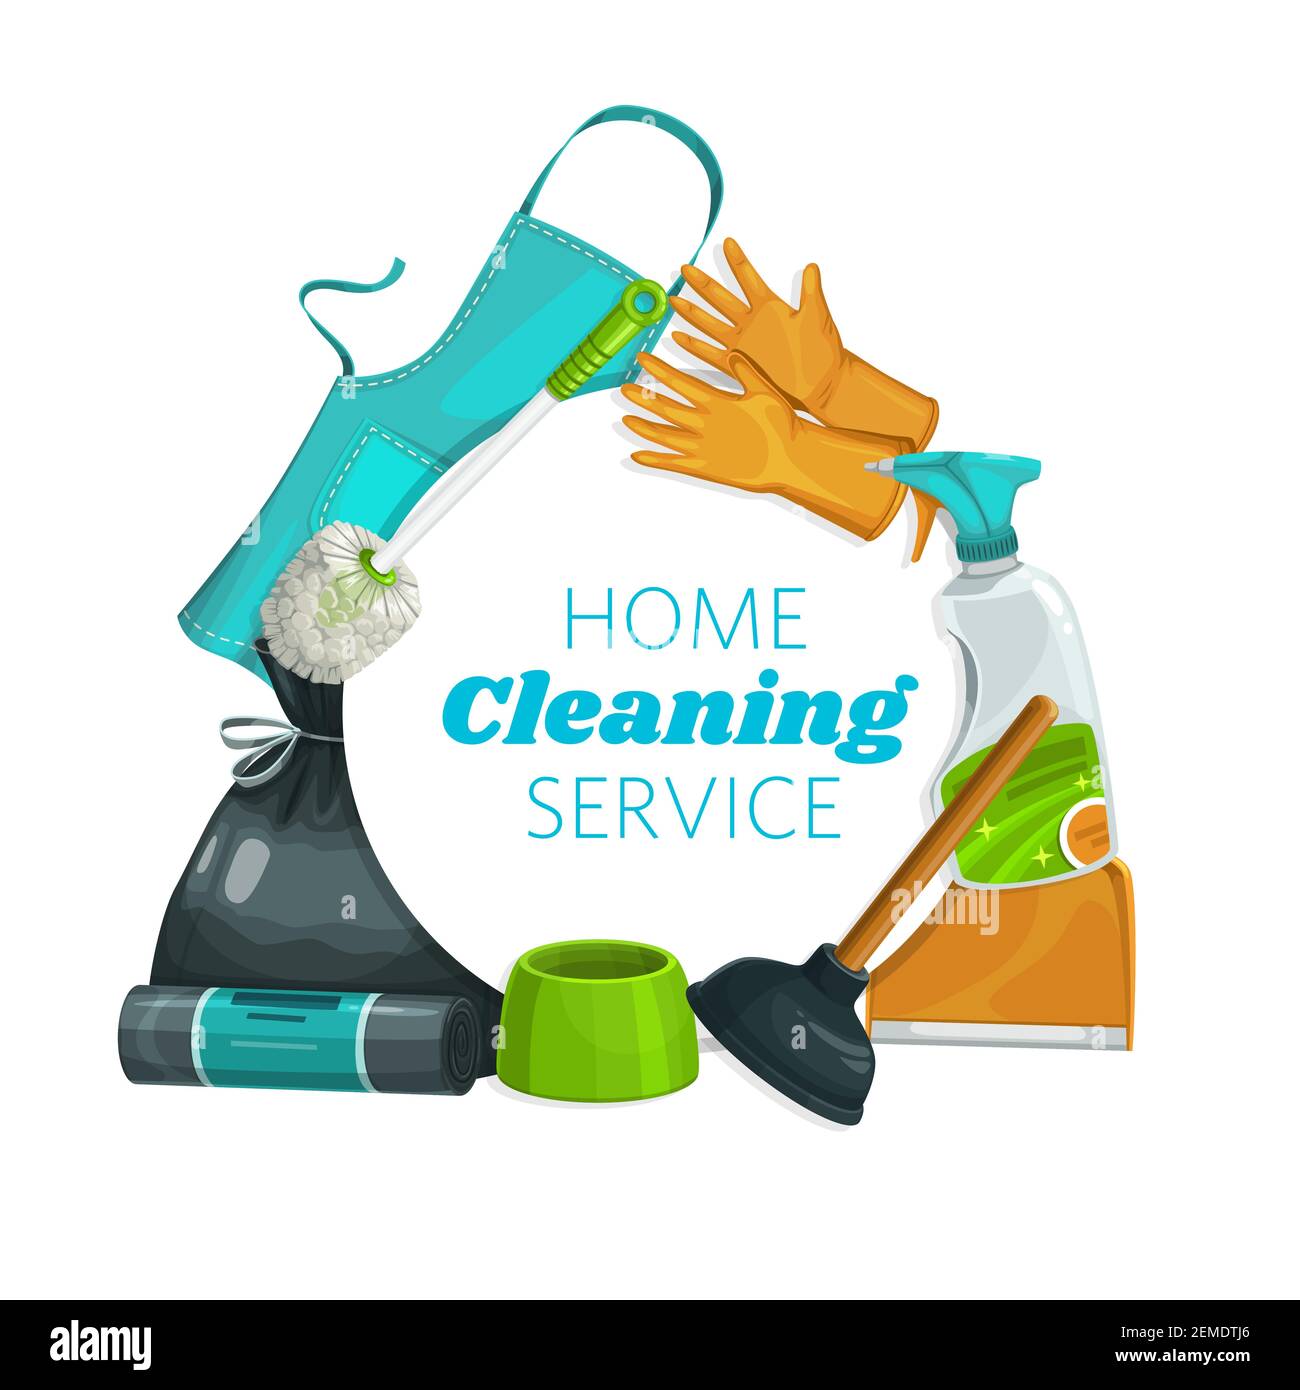 https://c8.alamy.com/comp/2EMDTJ6/house-cleaning-tools-and-equipment-clean-home-service-vector-household-detergents-home-cleaning-glass-window-wash-spray-toilet-plunger-and-brush-2EMDTJ6.jpg